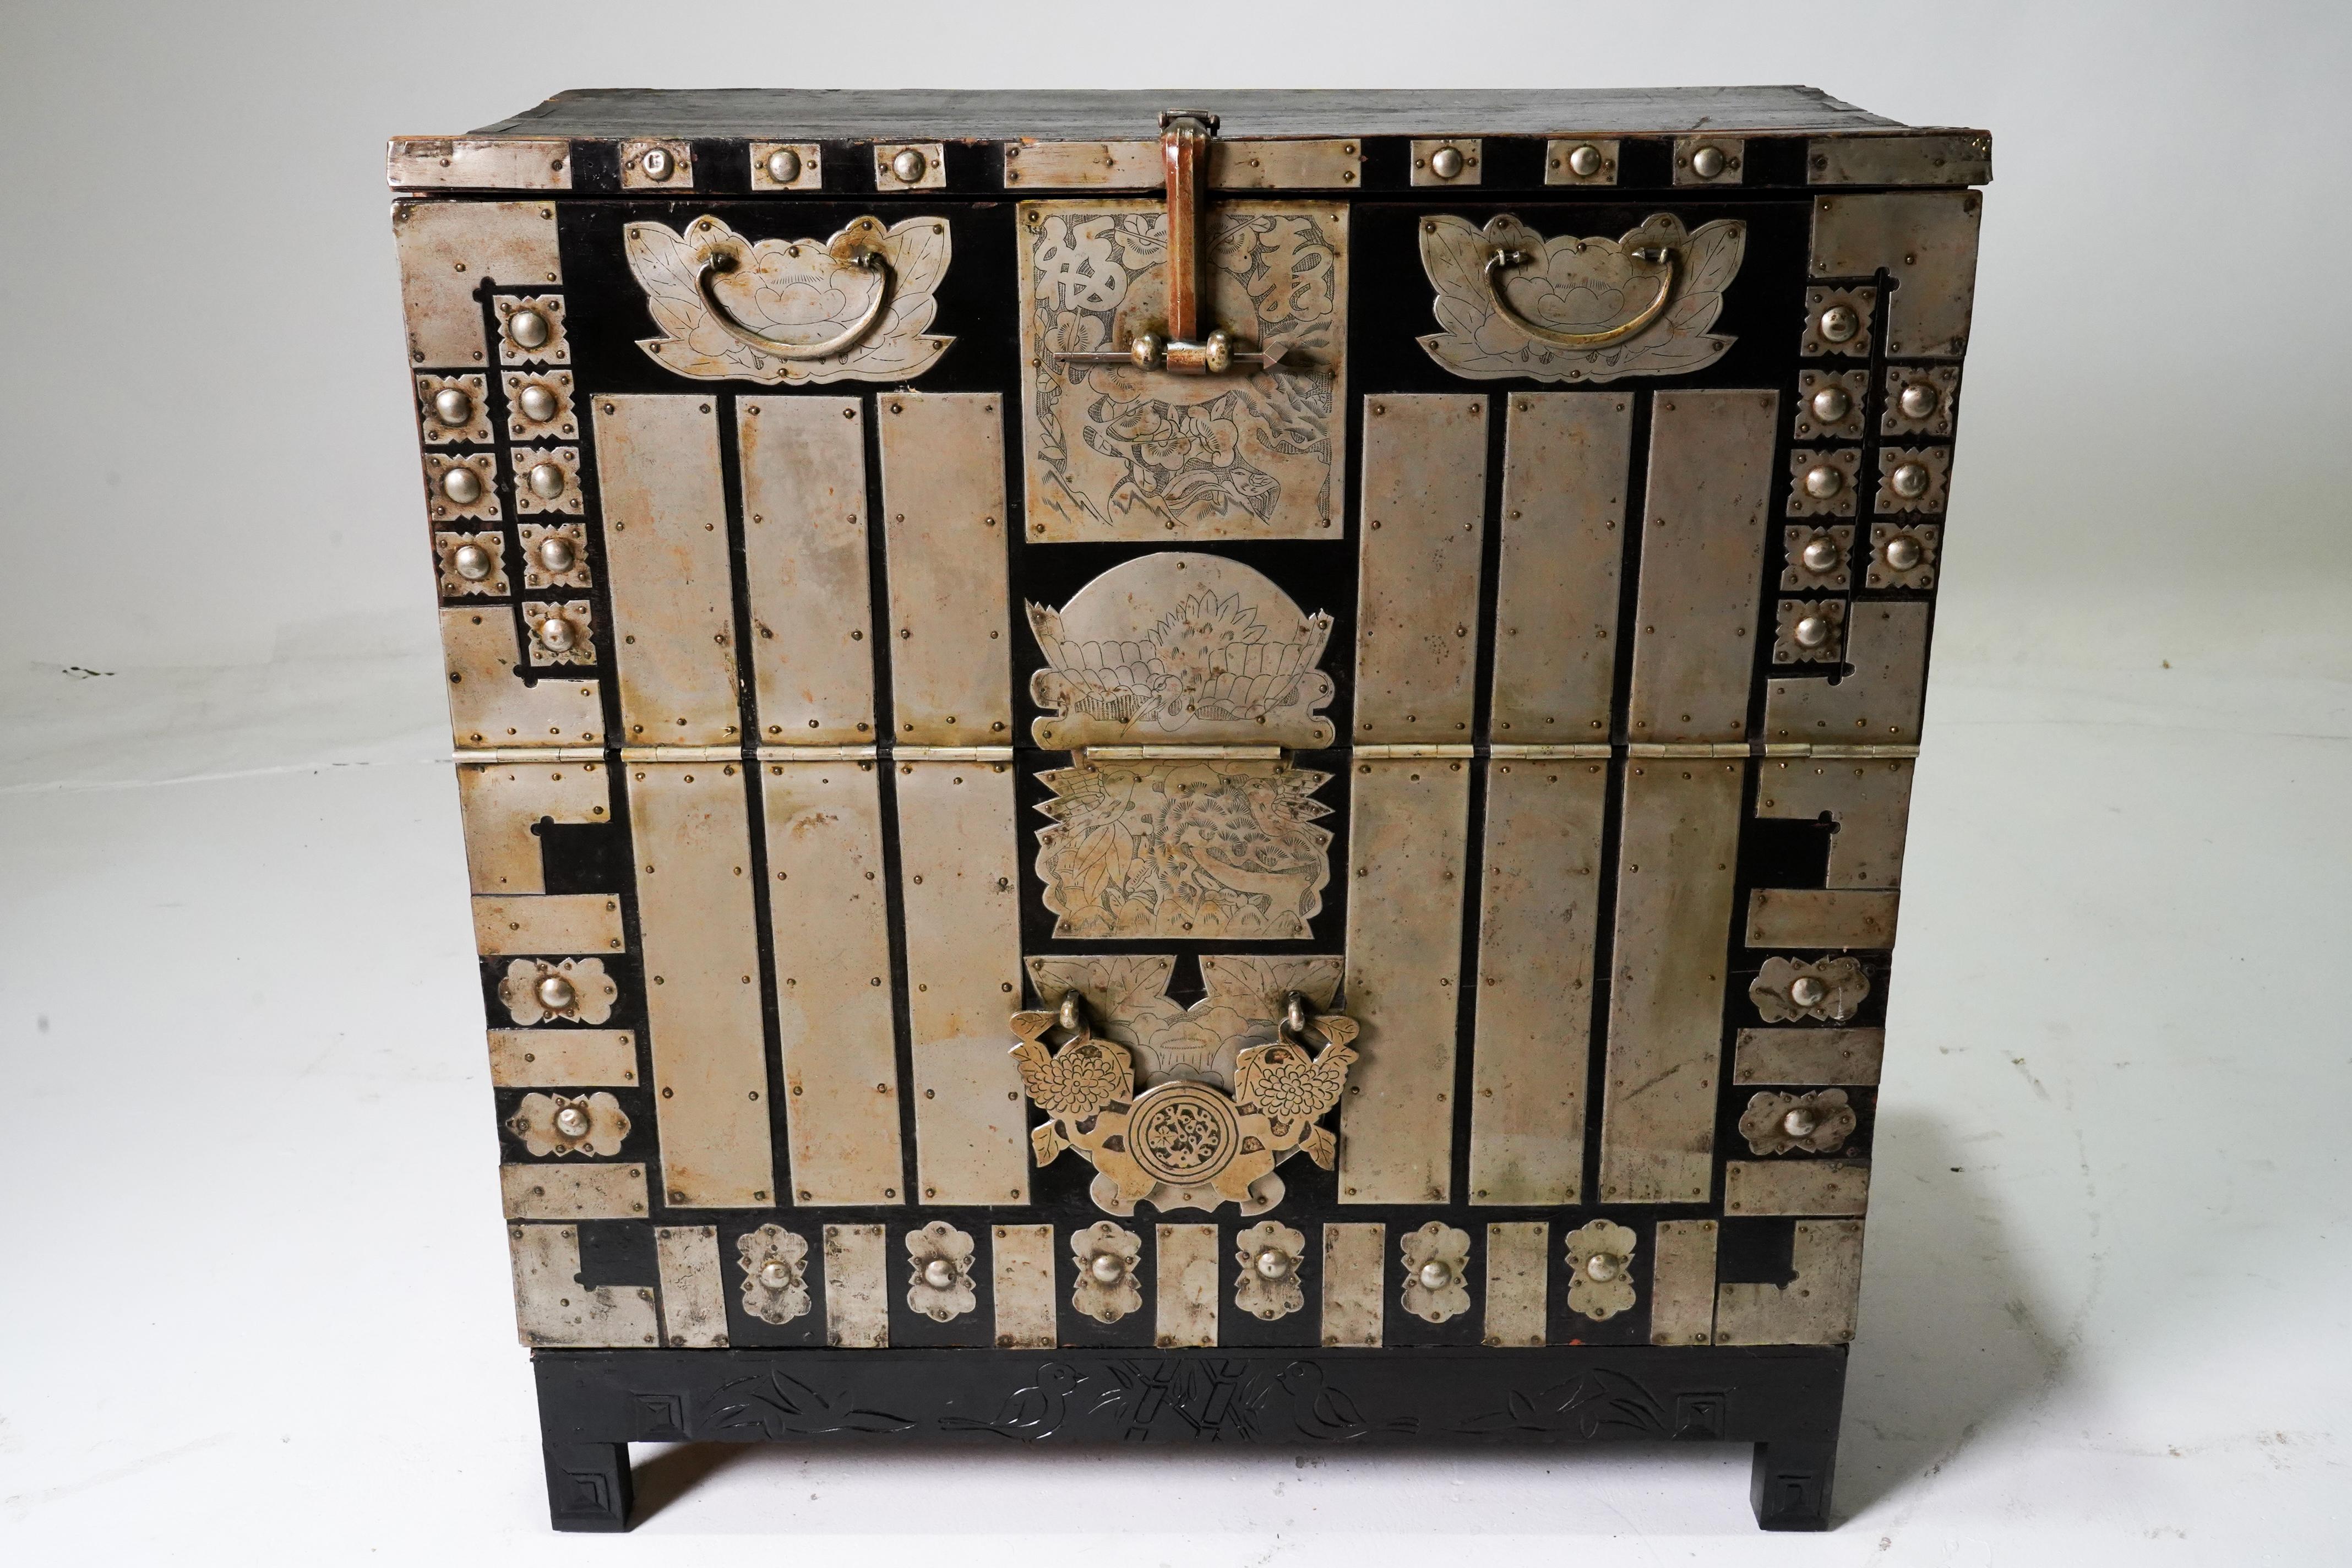 This brightly ornamented antique Korean chest once contained blankets and clothing given as part of a marriage dowry.  The distinctive feature of the piece is its abundant white brass hardware affixed to the solid elm wood body.  The piece has white